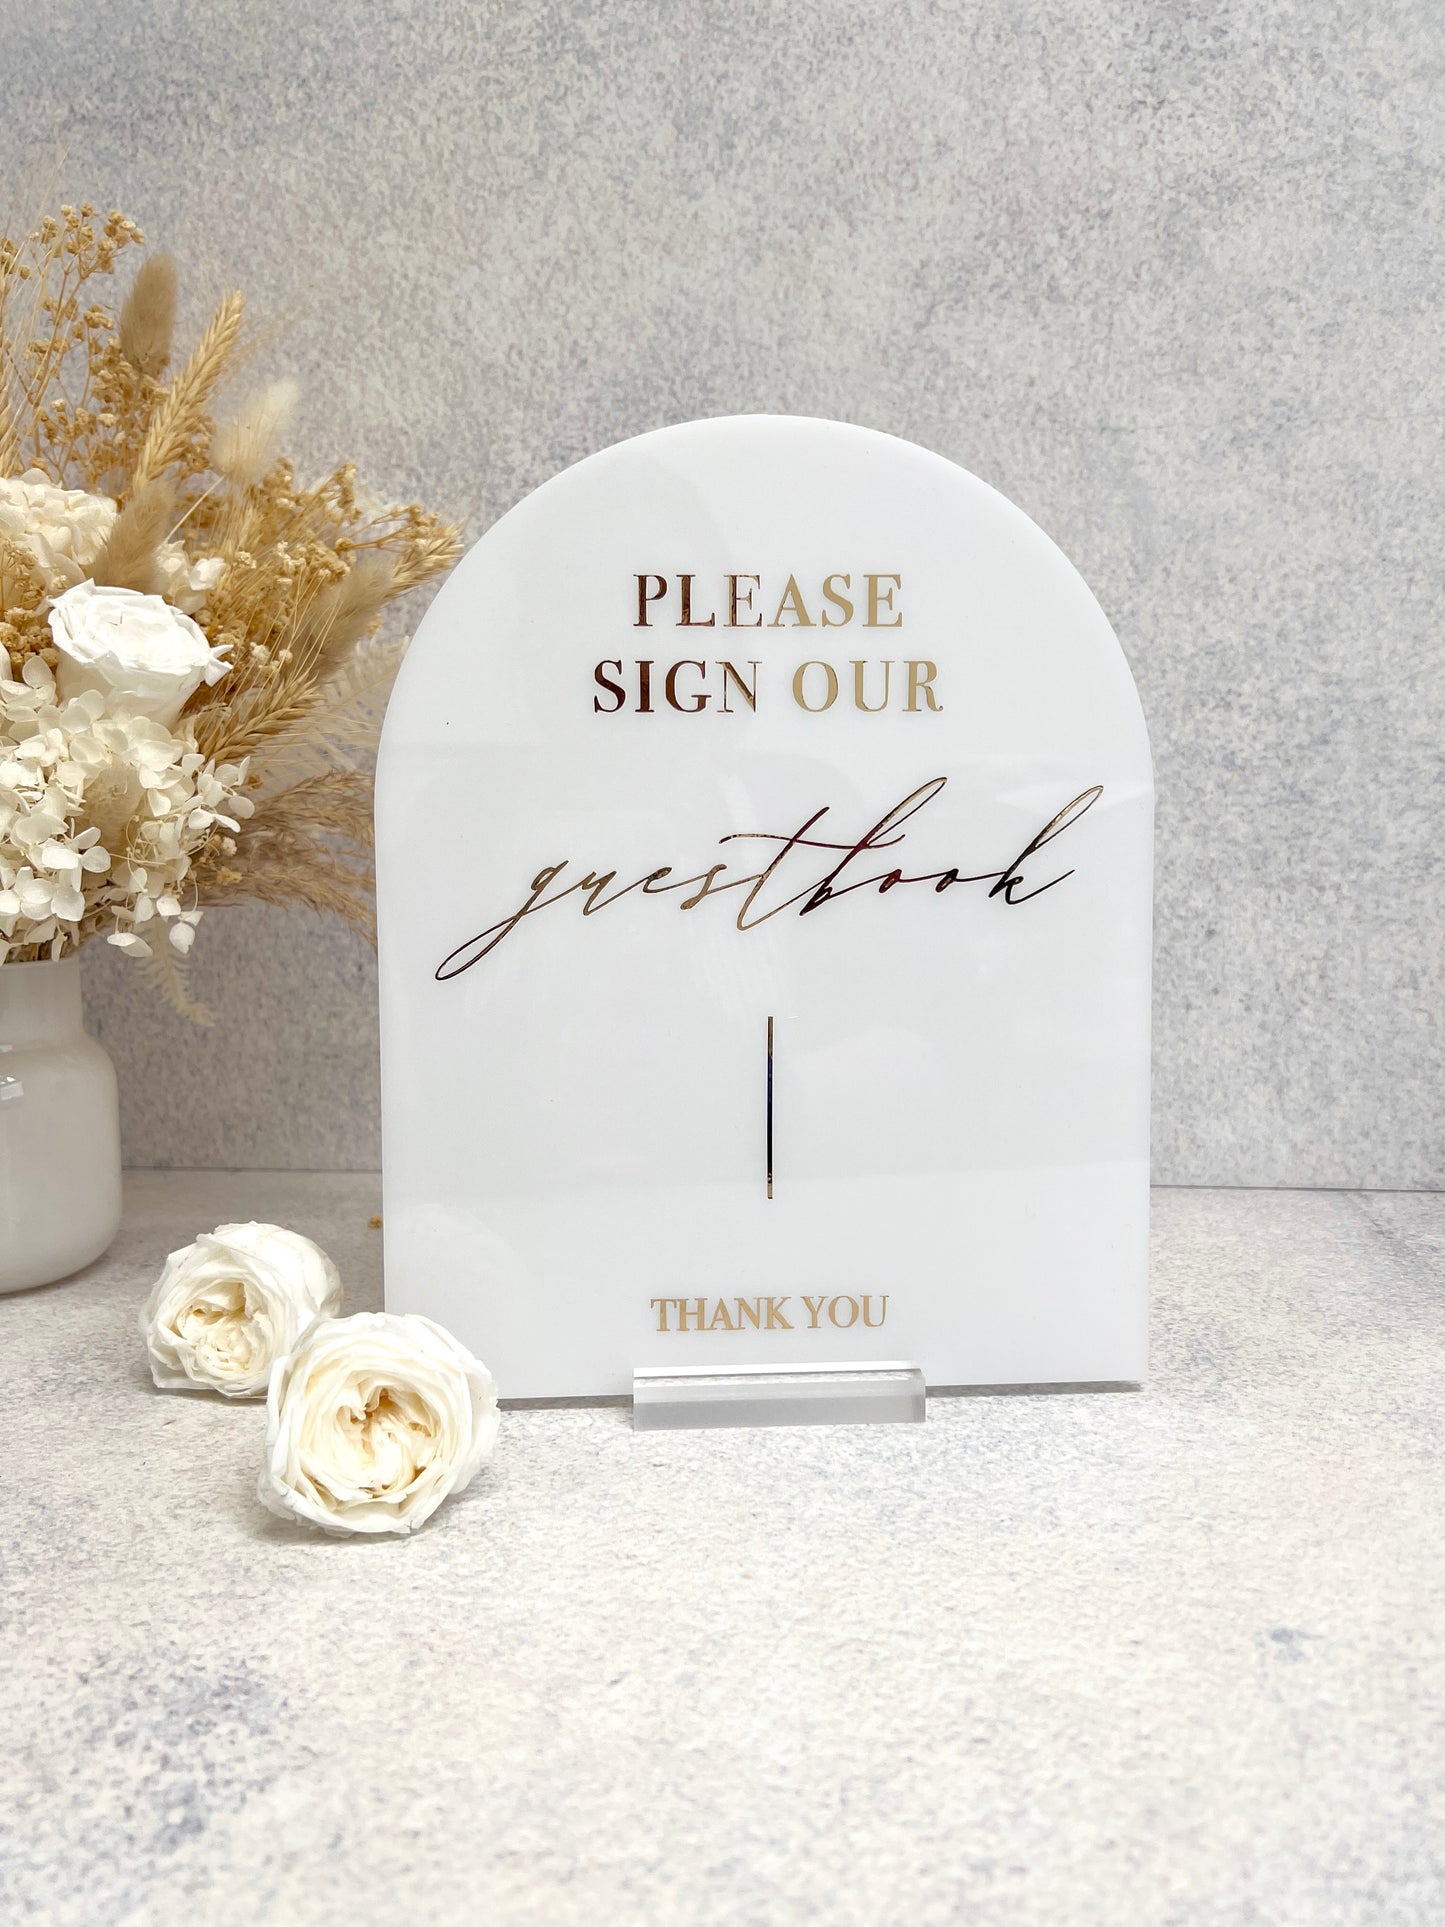 Guestbook Arch Sign - Please Sign Our Guestbook